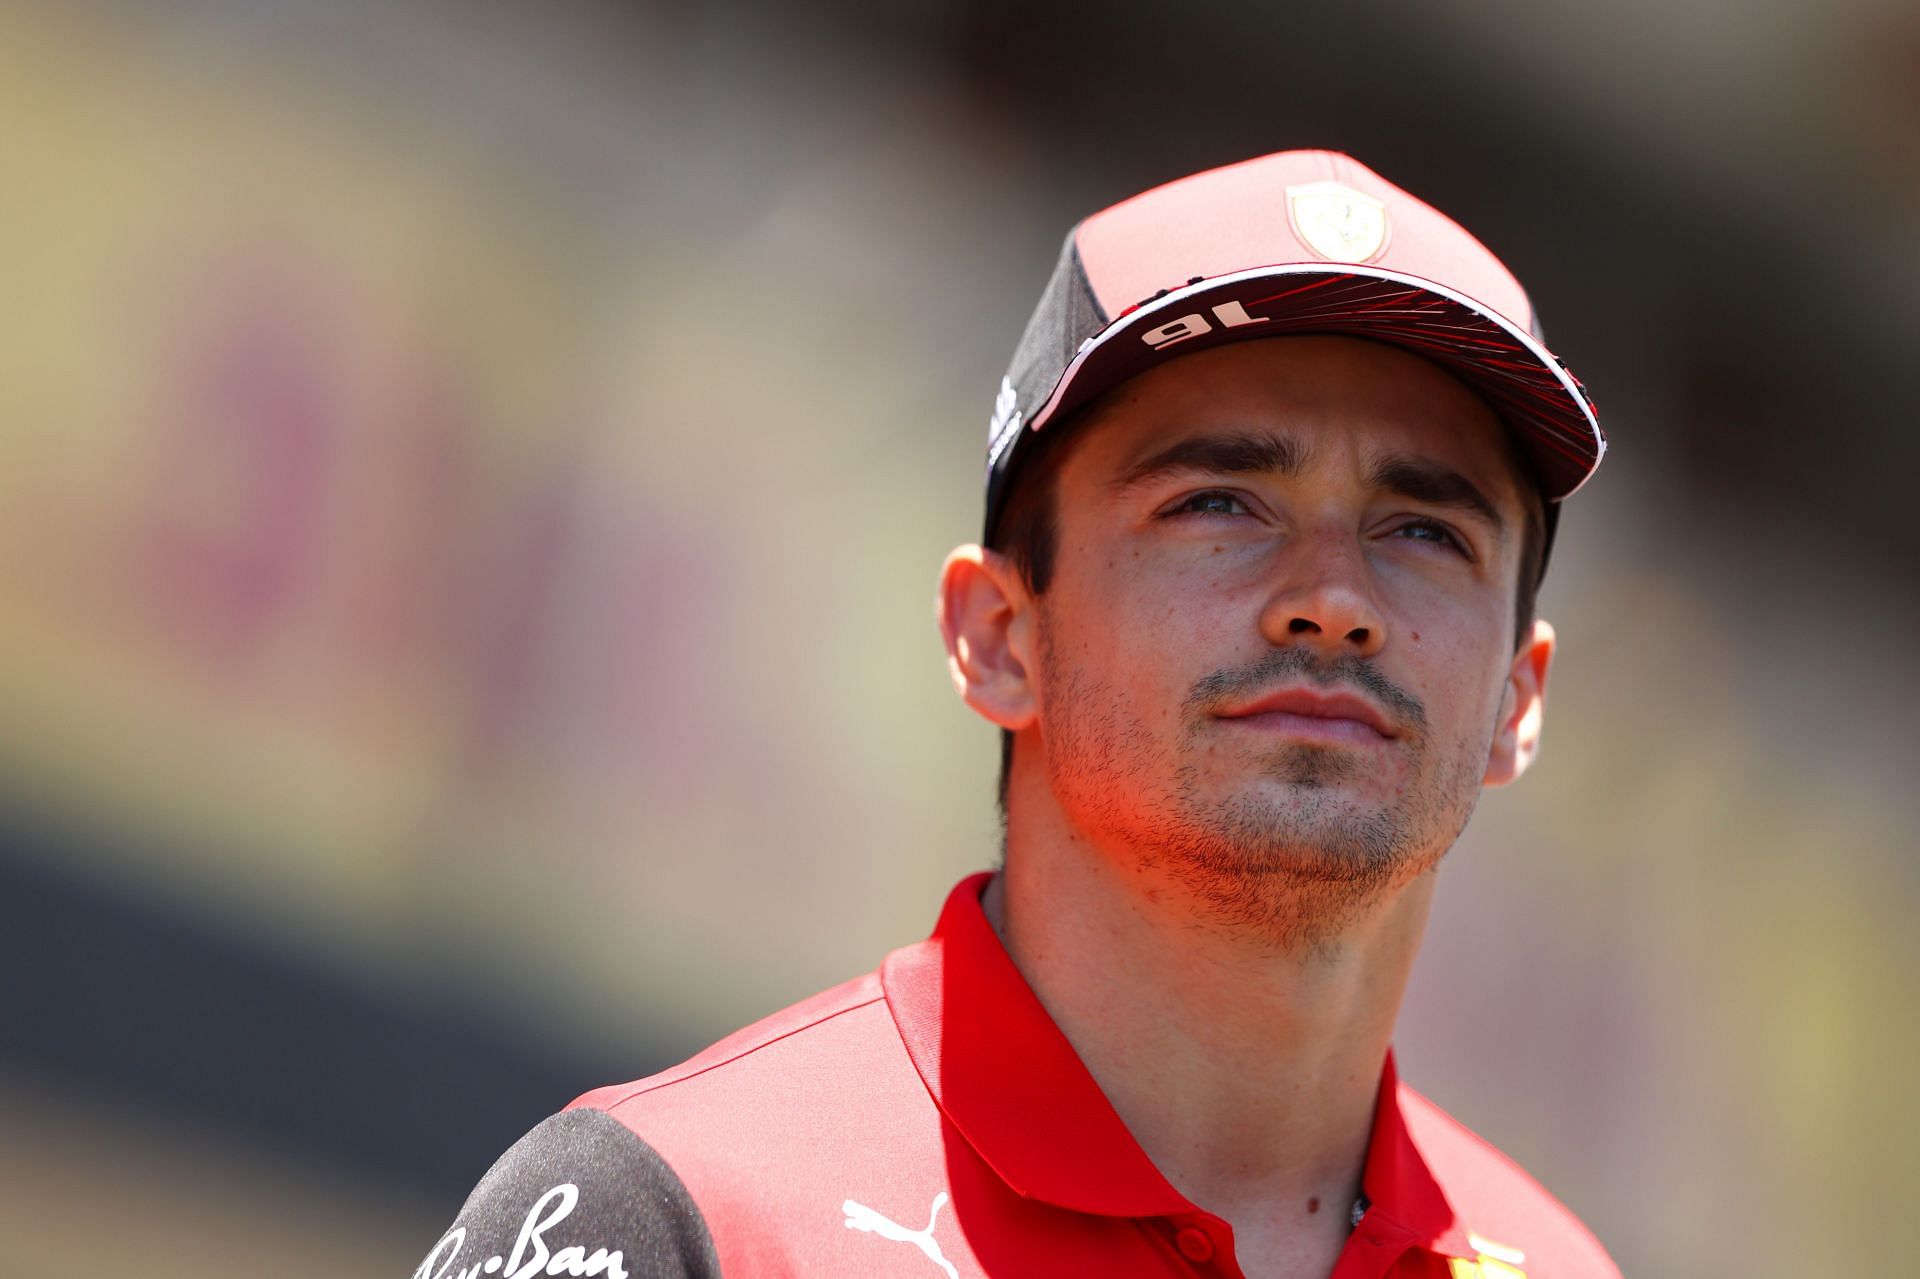 Ferrari driver Charles Leclerc looks on ahead of the 2022 F1 Azerbaijan GP (Photo by Clive Rose/Getty Images)